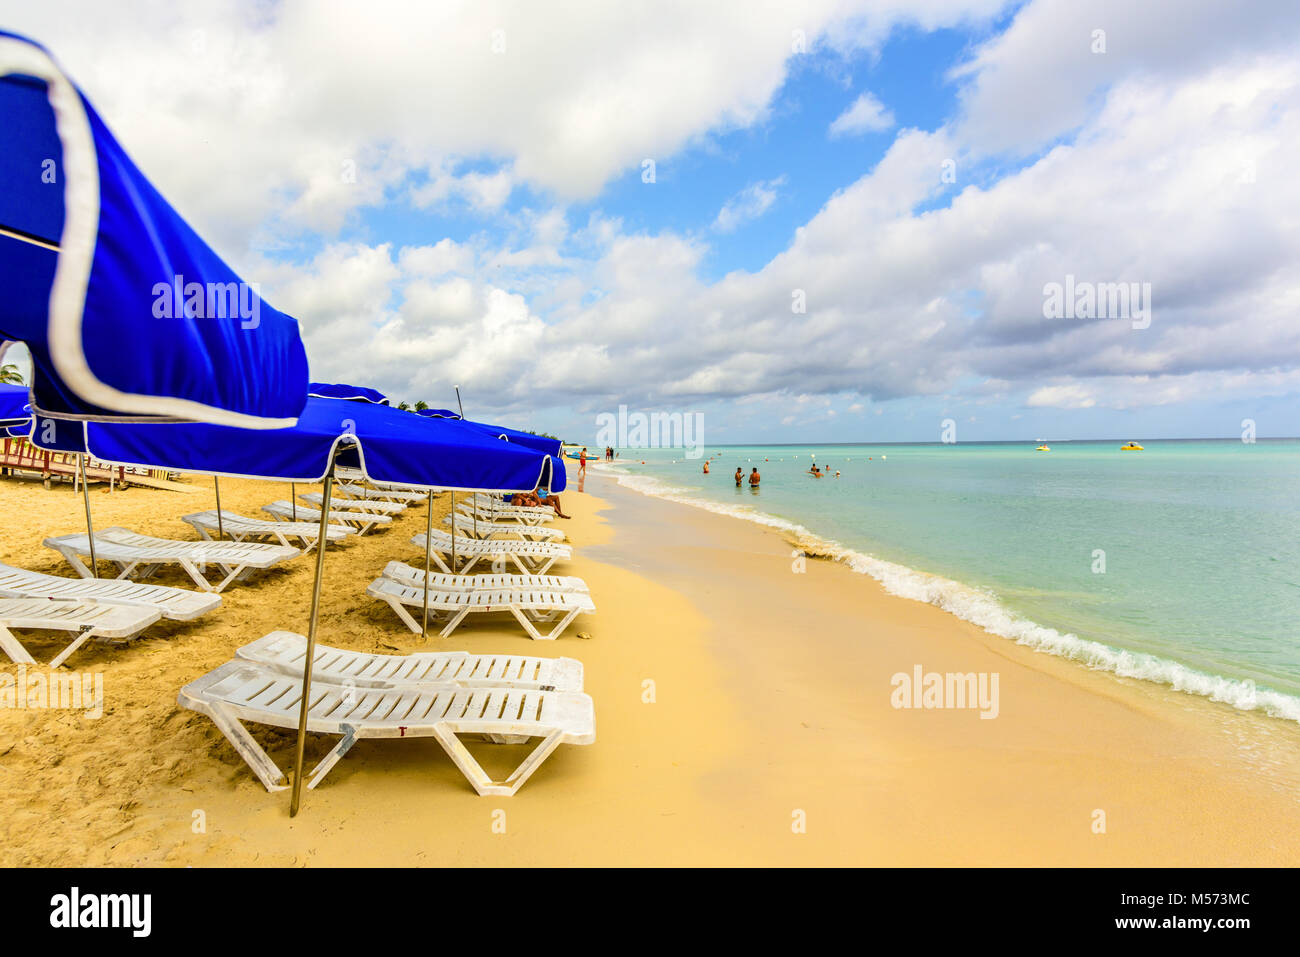 white chaise lounges and blue umbrellas stand on a beach in the sand near the ocean with green waves and a blue sky with white clouds Stock Photo